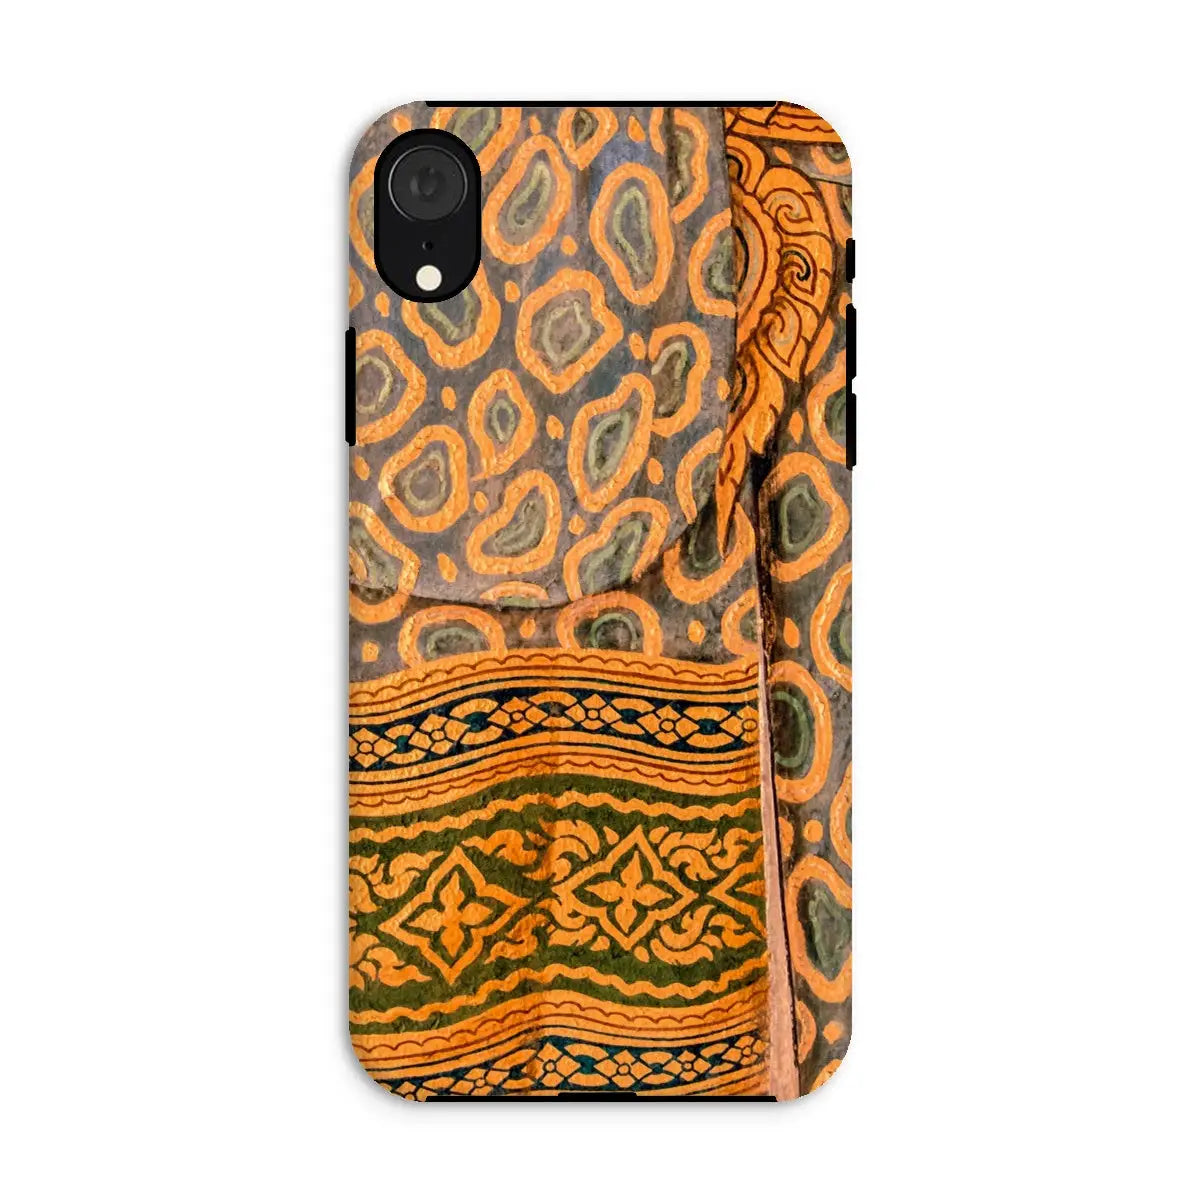 Lady In Waiting - Royal Siam Mural Art Phone Case - Iphone Xr / Matte - Mobile Phone Cases - Aesthetic Art